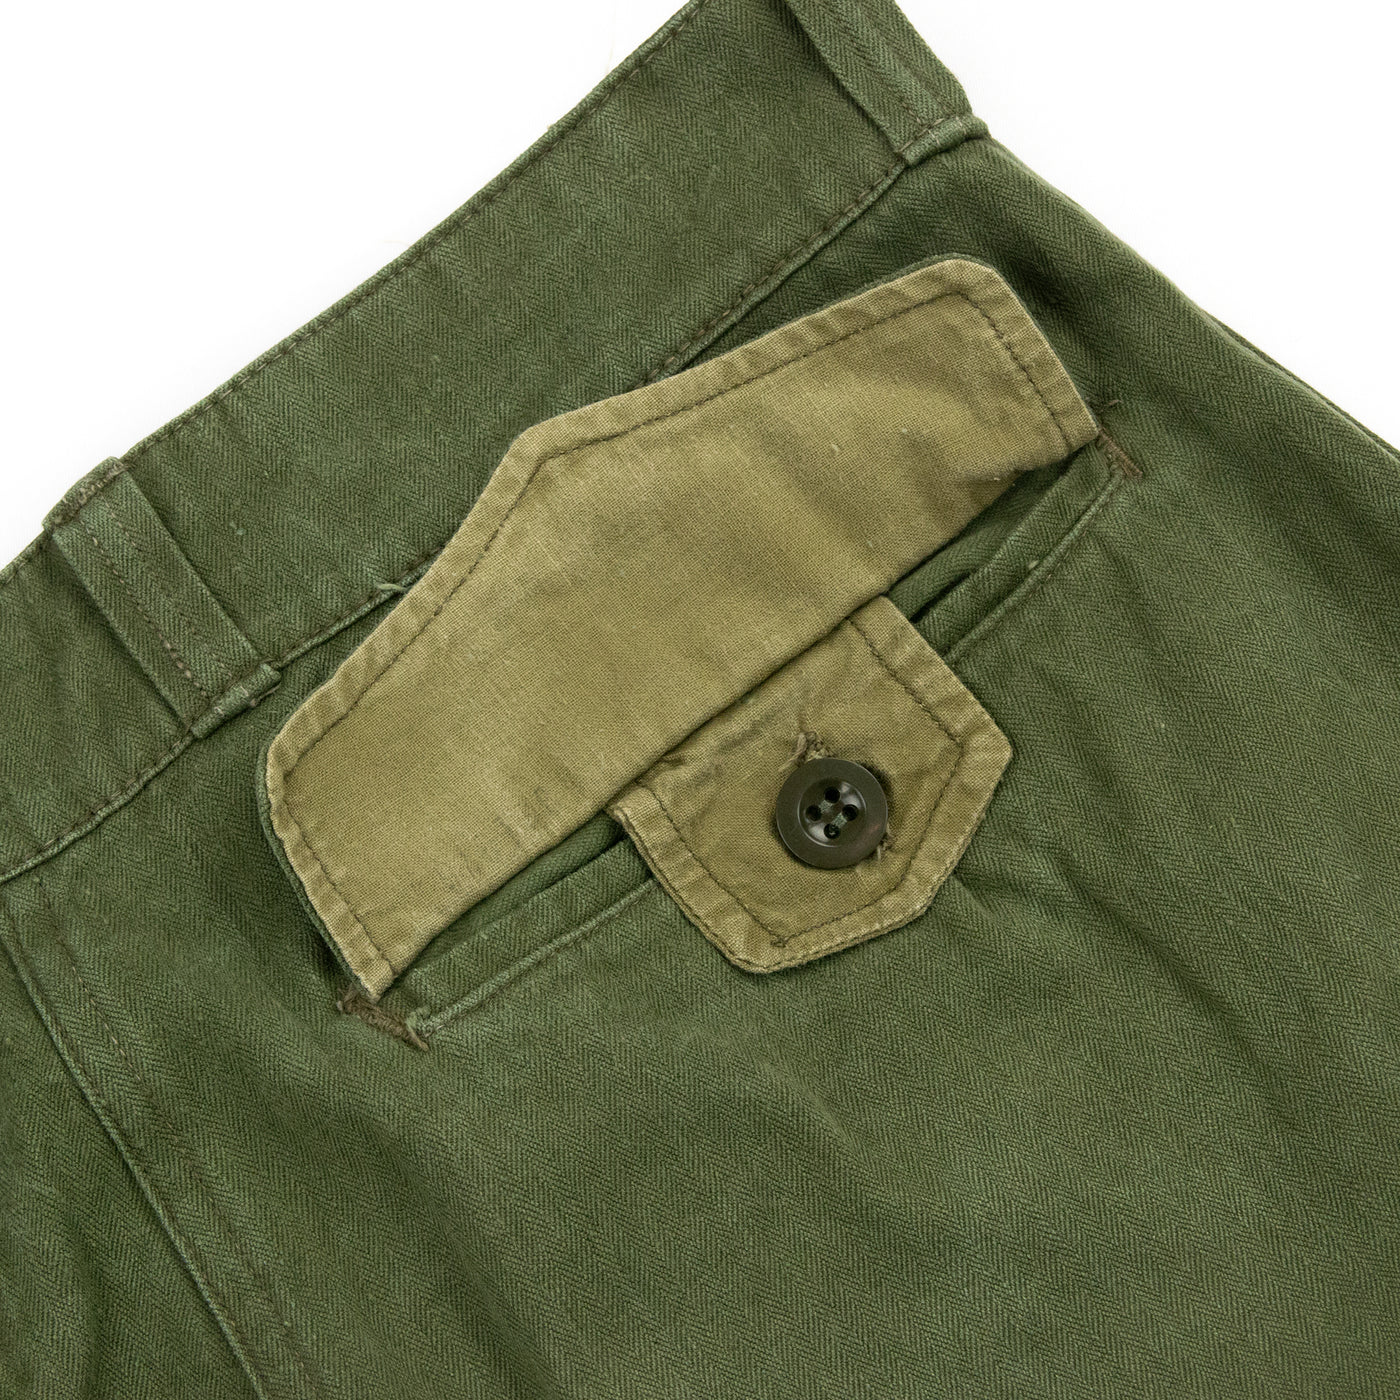 Vintage 1950s French Army M47 HBT Military Cargo Trousers - 29